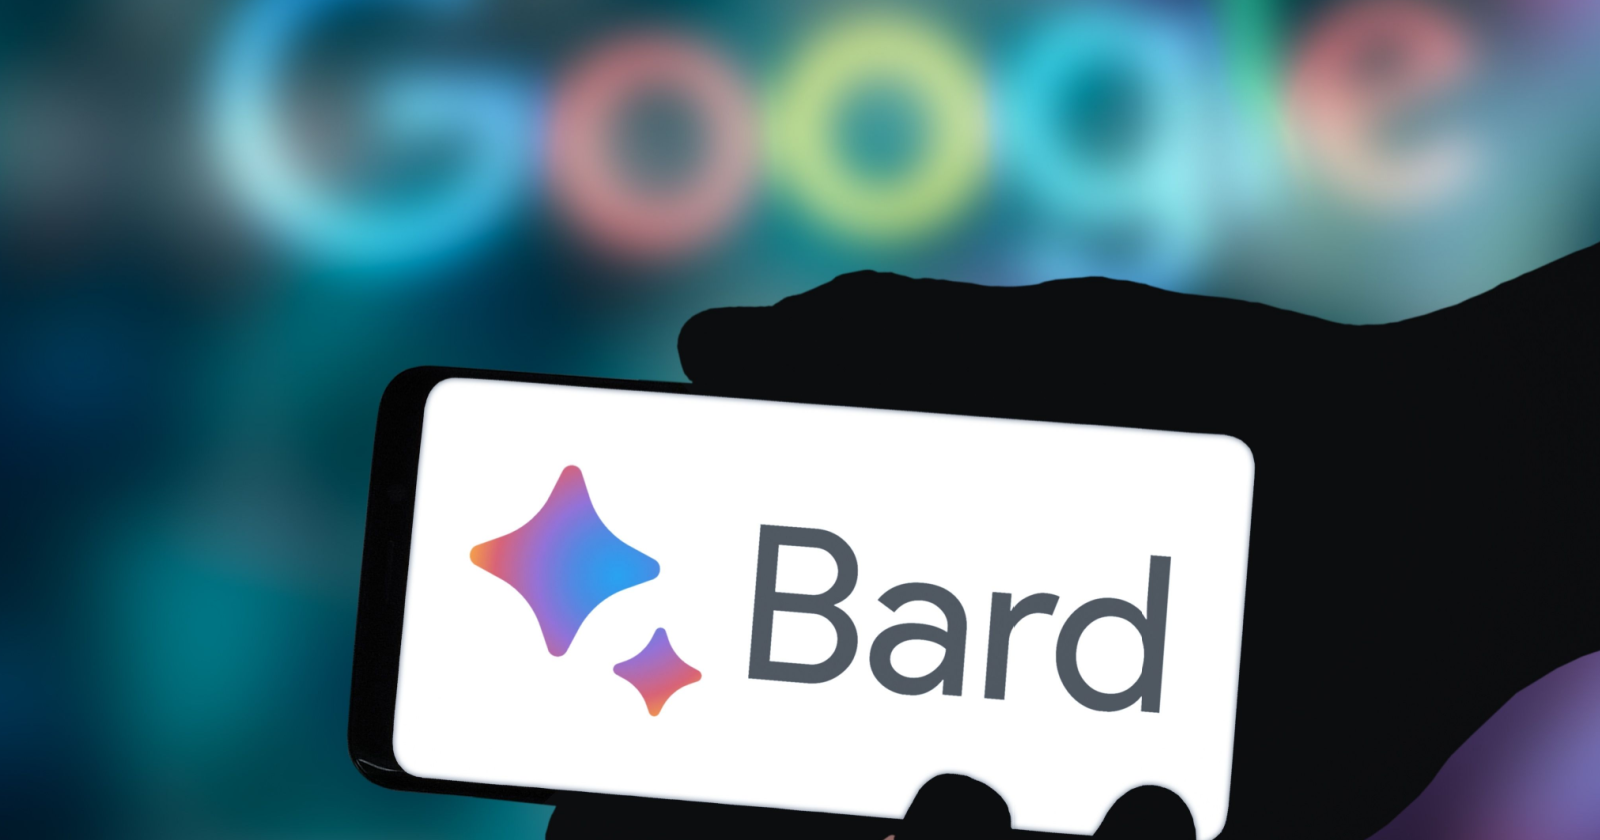 Google Bard Removes Waitlist, Adds Image & Coding Features